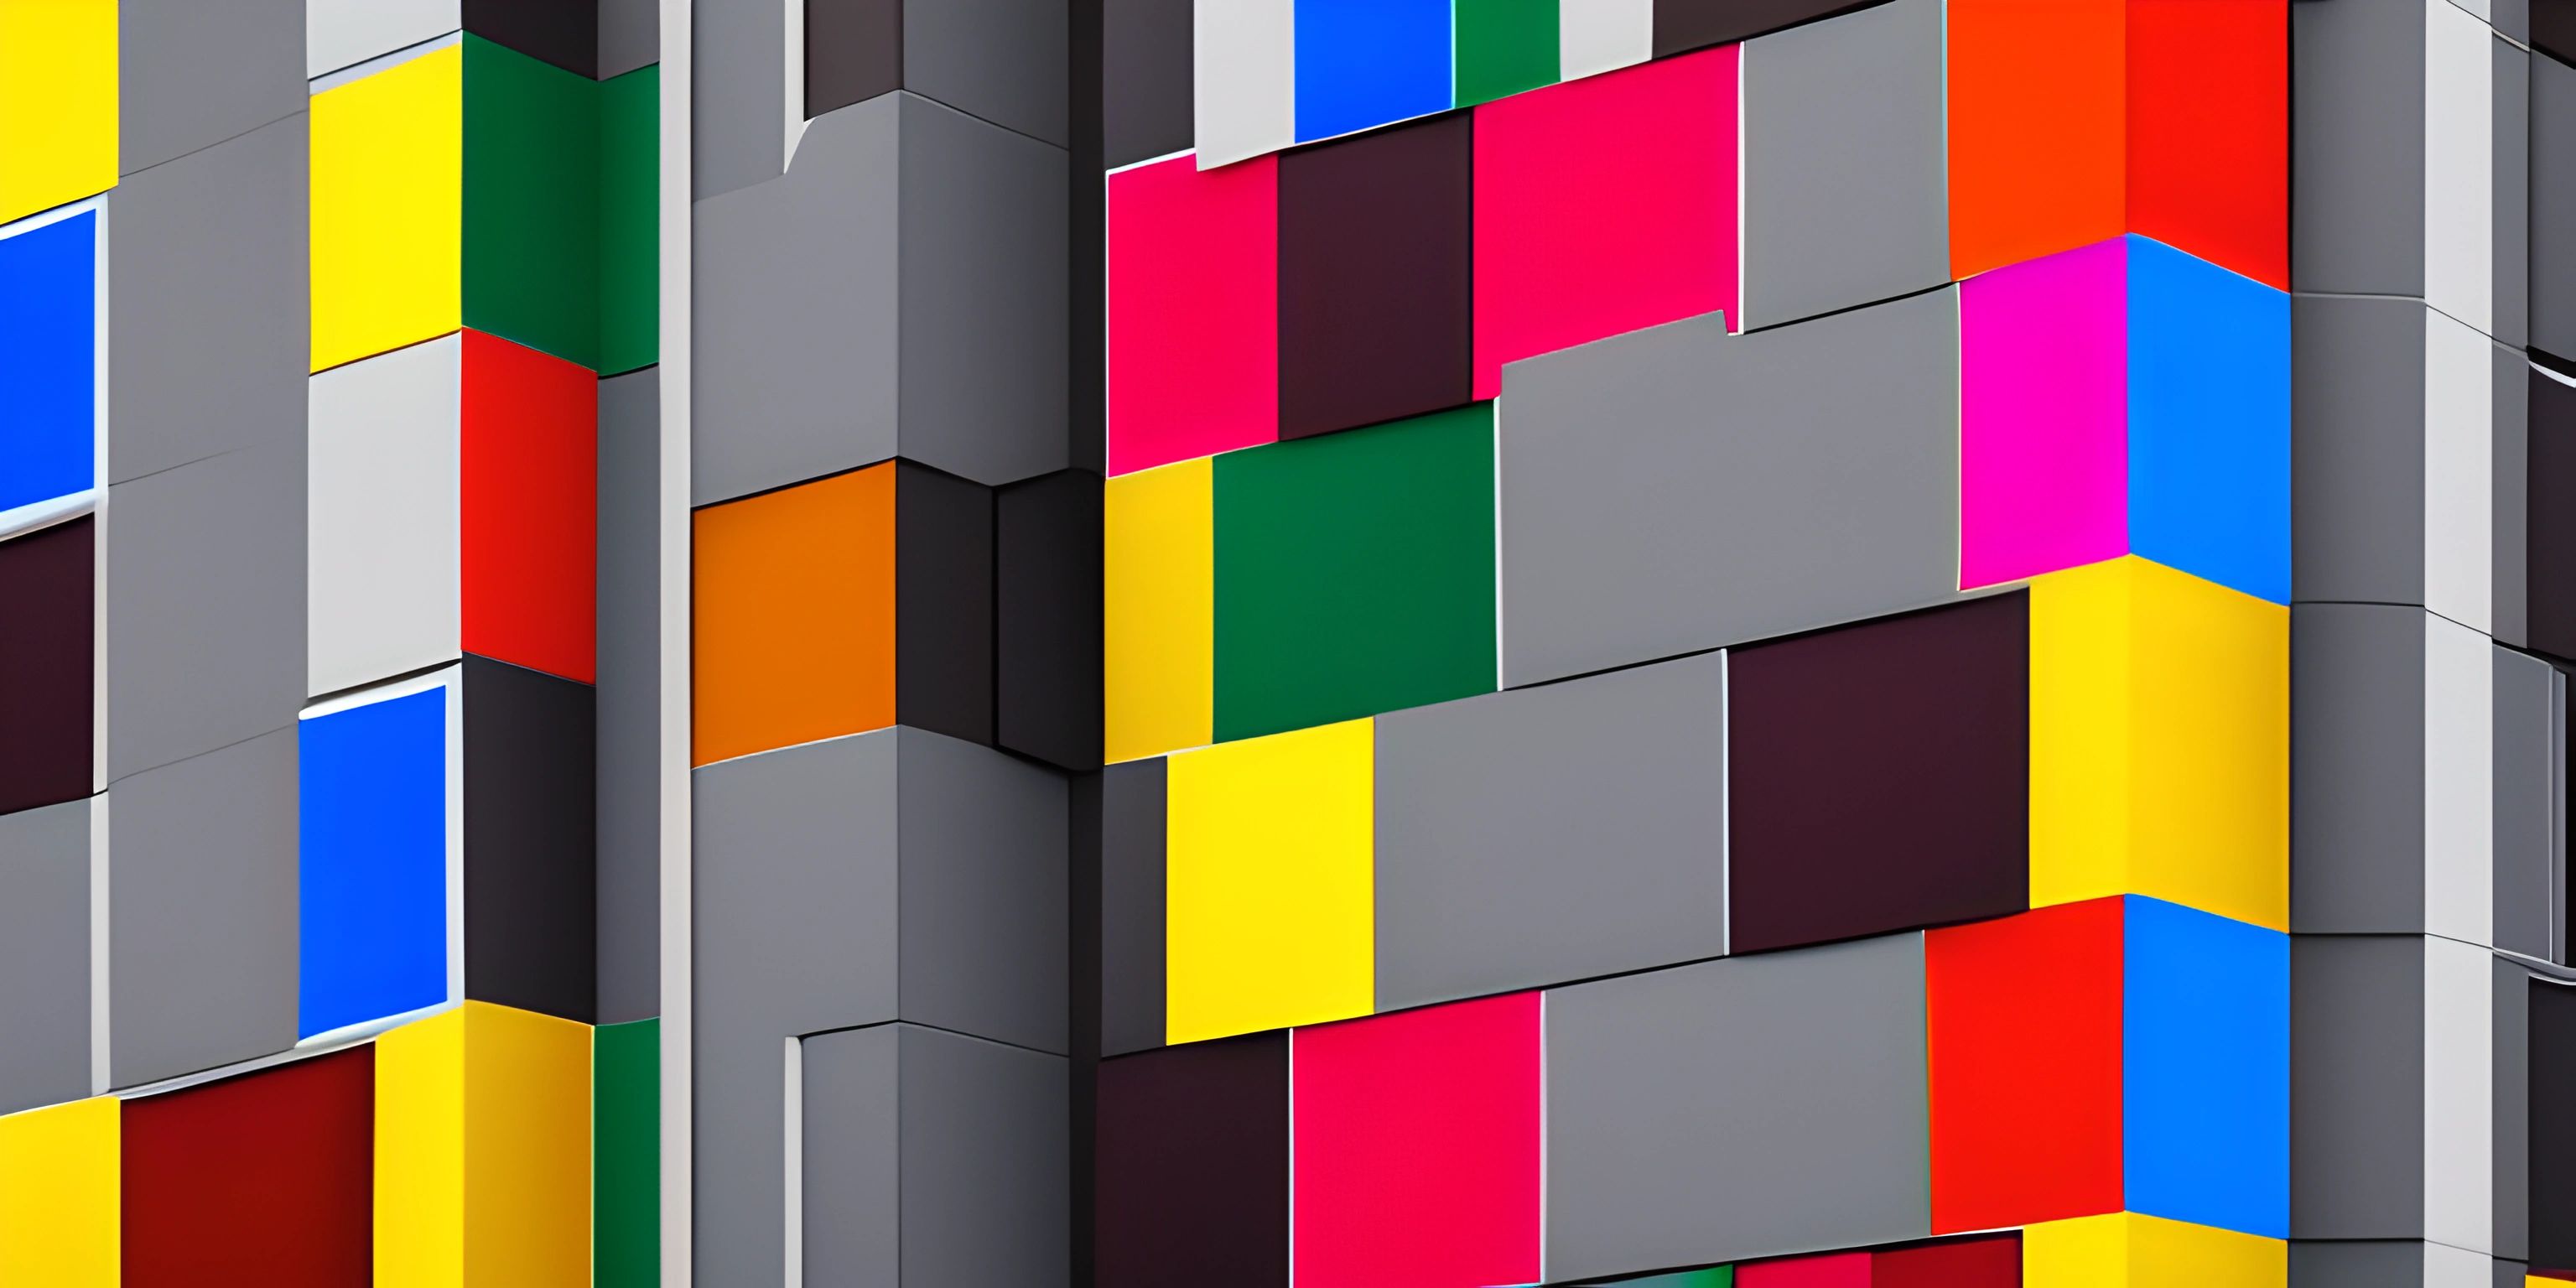 an artistic image of a multicolored building facade taken at the moment of completion